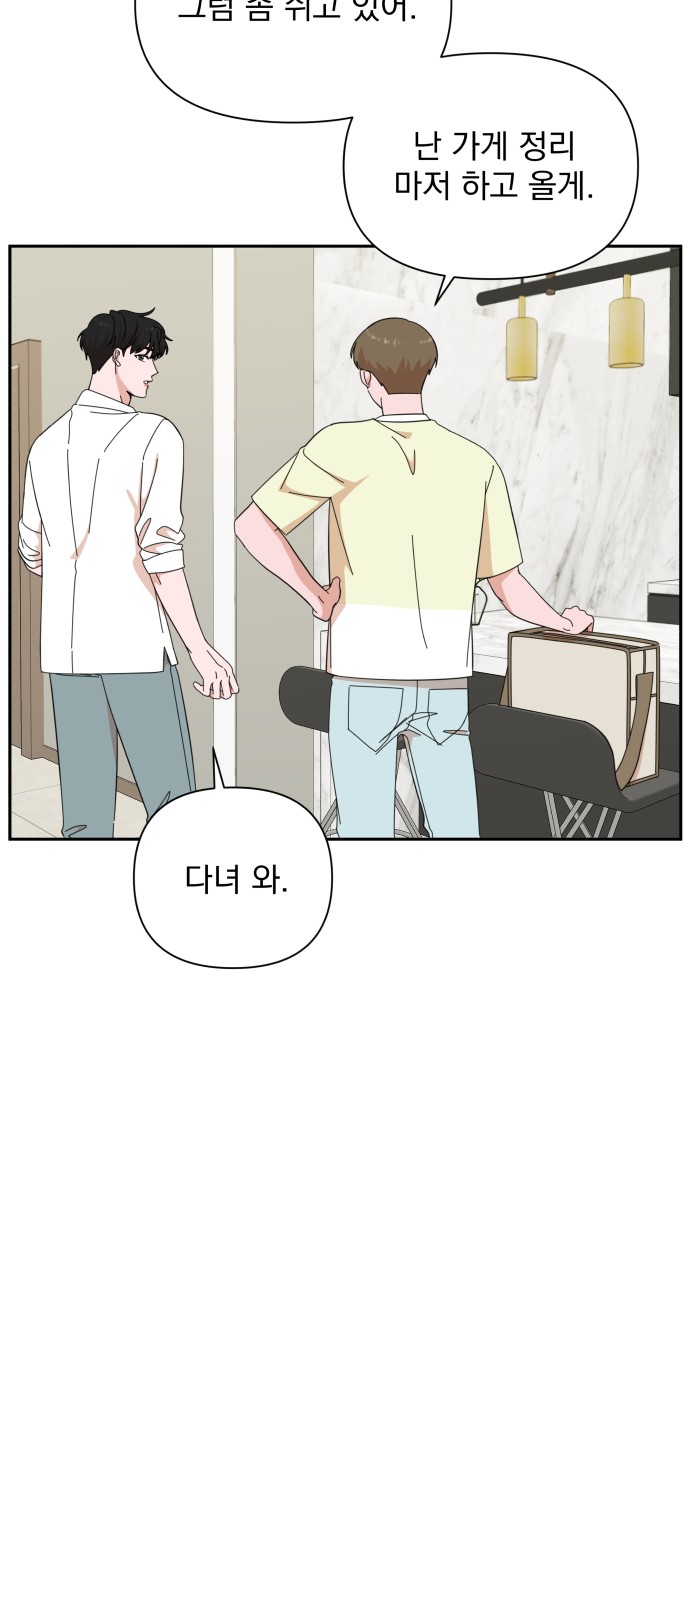 The Man With Pretty Lips - Chapter 22 - Page 4